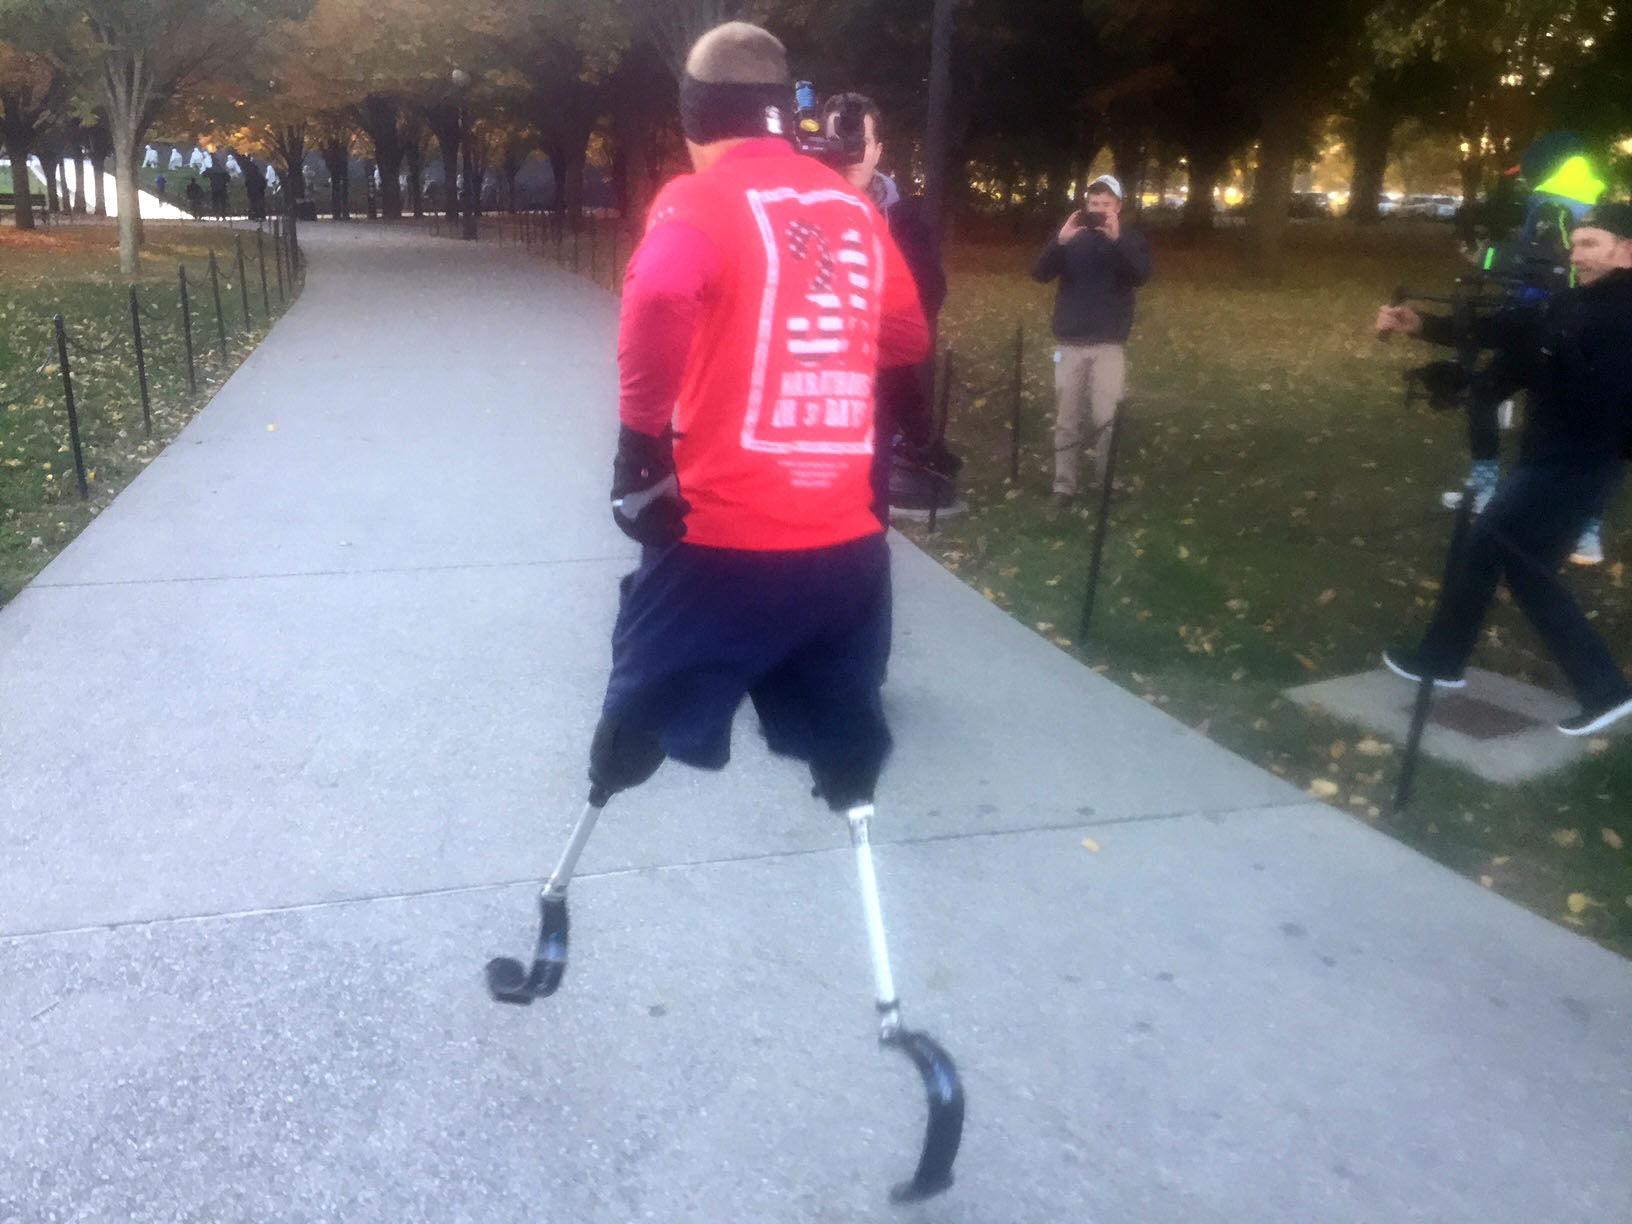 Rob Jones, a double amputee, will have ran 31 marathons in 31 days within 31 cities after his last run around the National Mall on Veterans Day. (WTOP/John Domen)